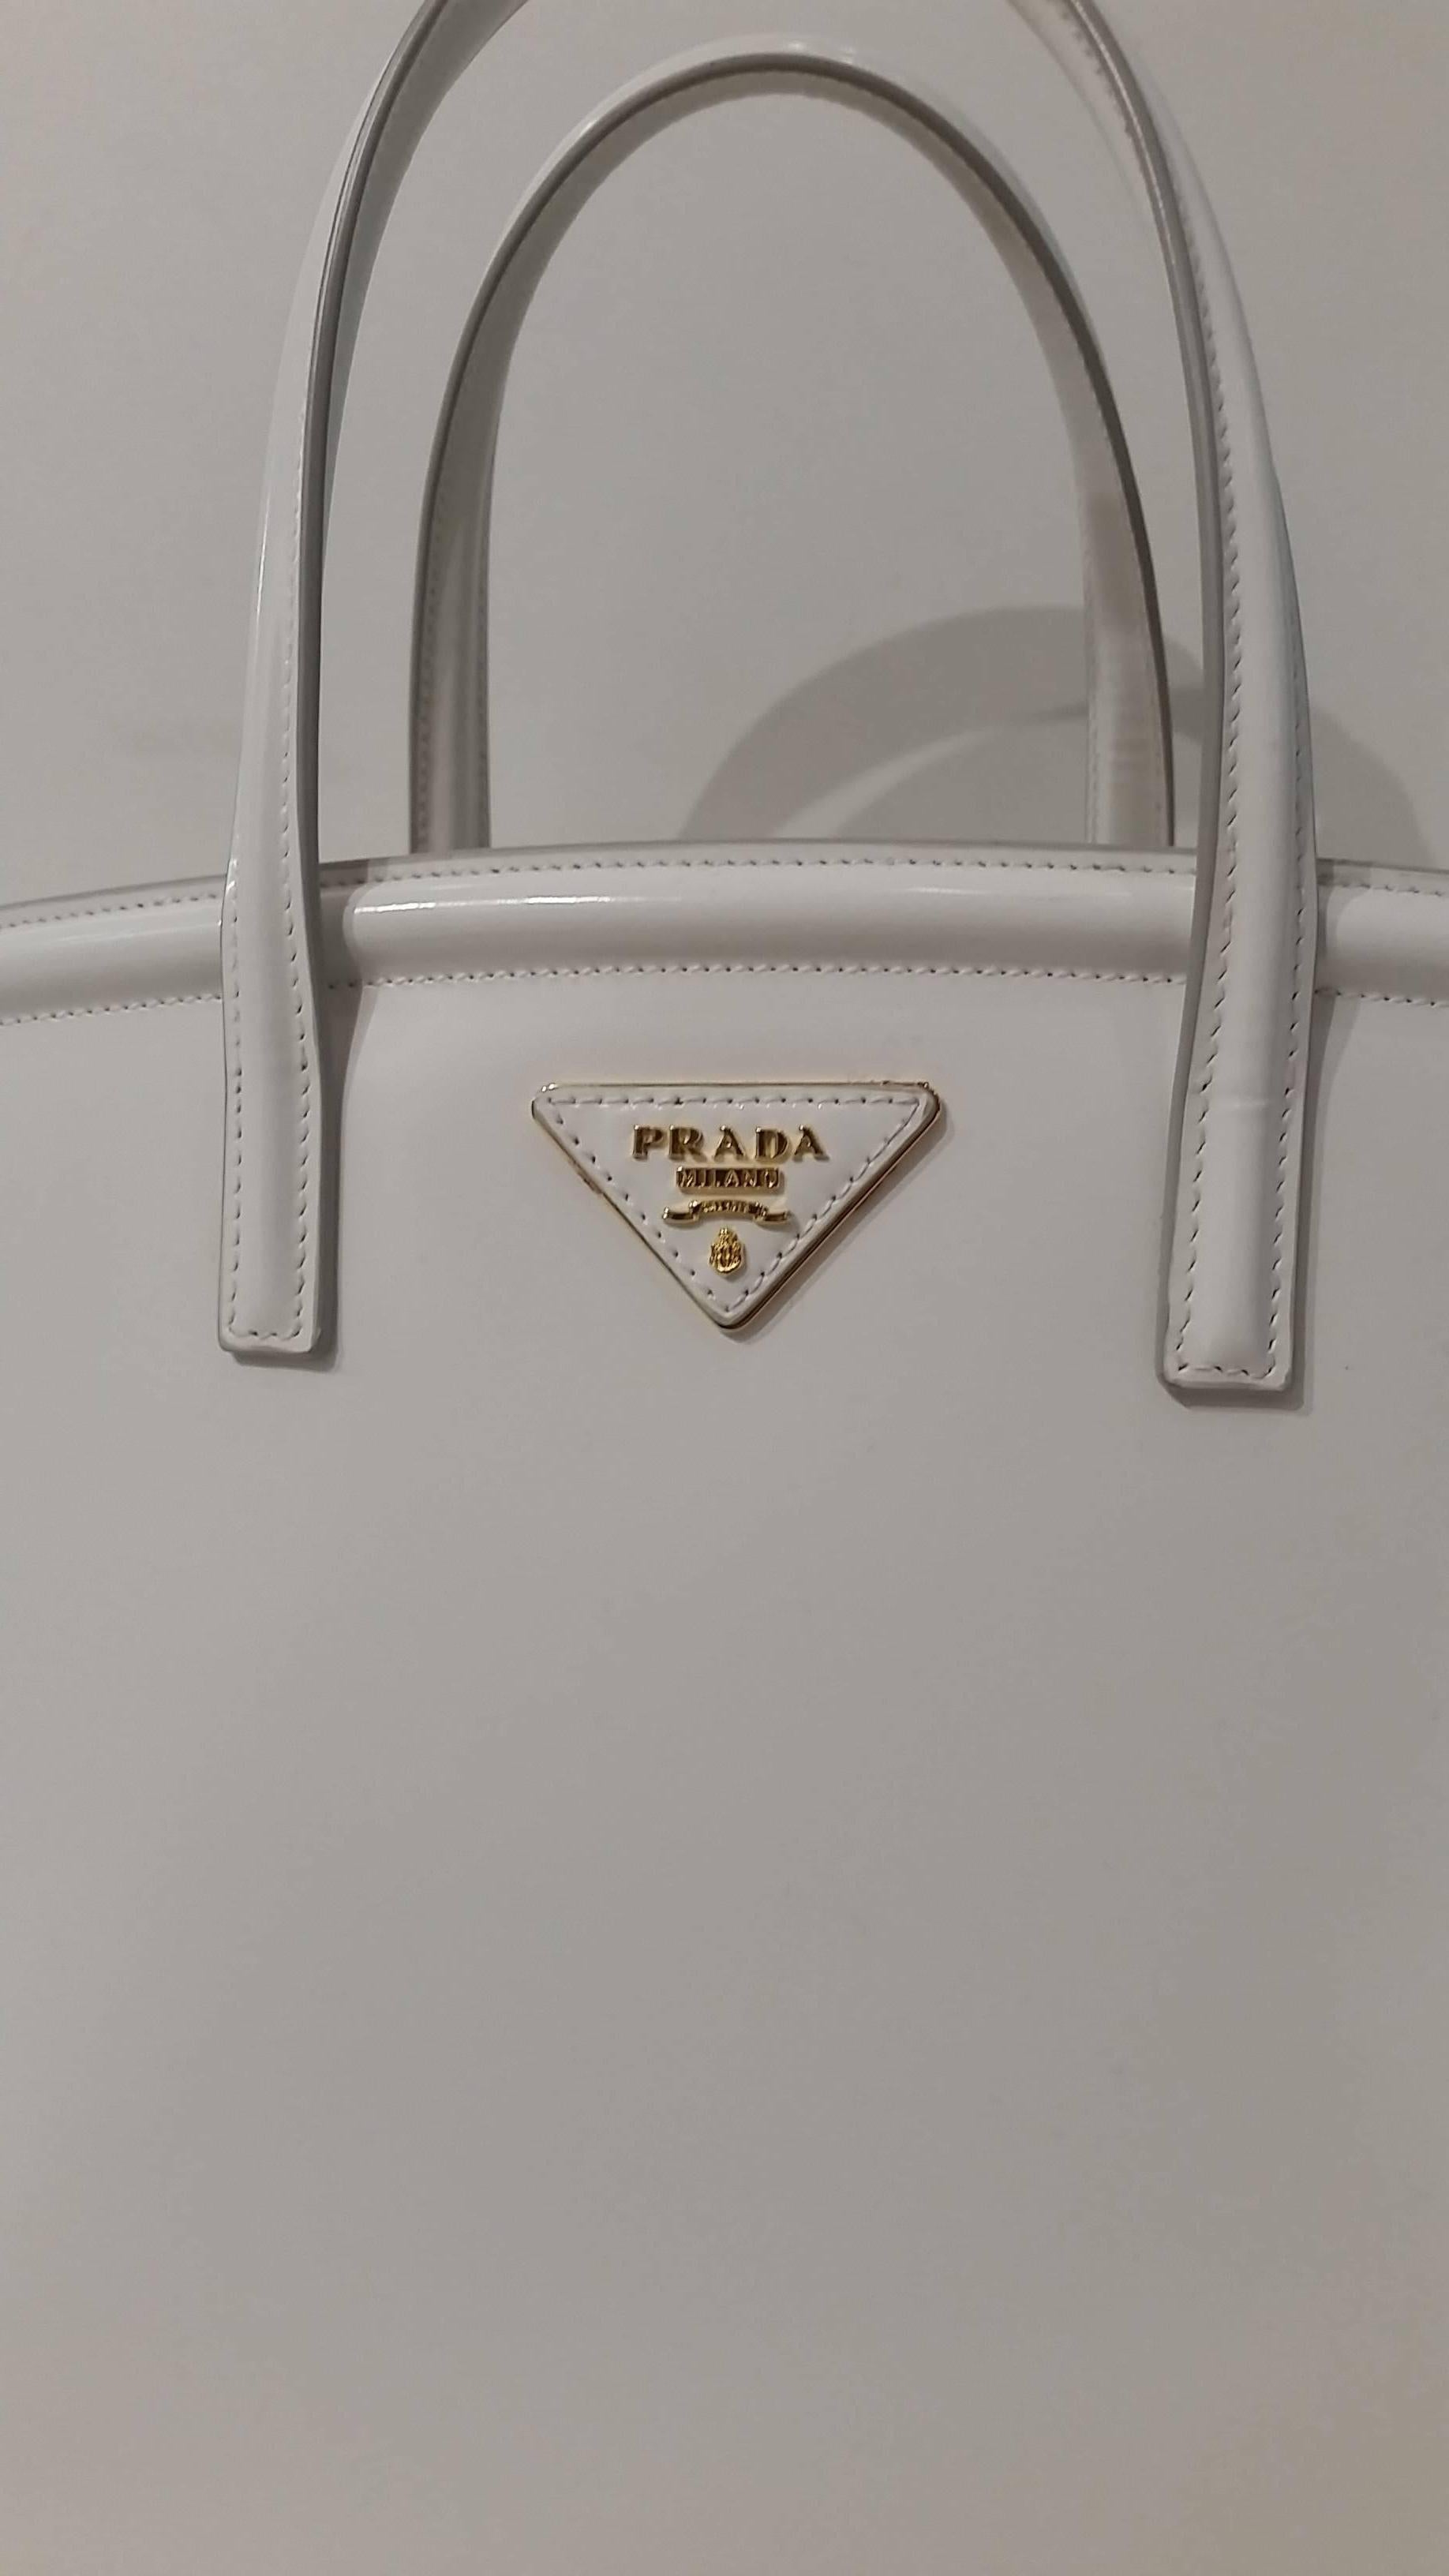 2000s Prada white leather bag with shoulderbagn ever used still with tags and dust bag